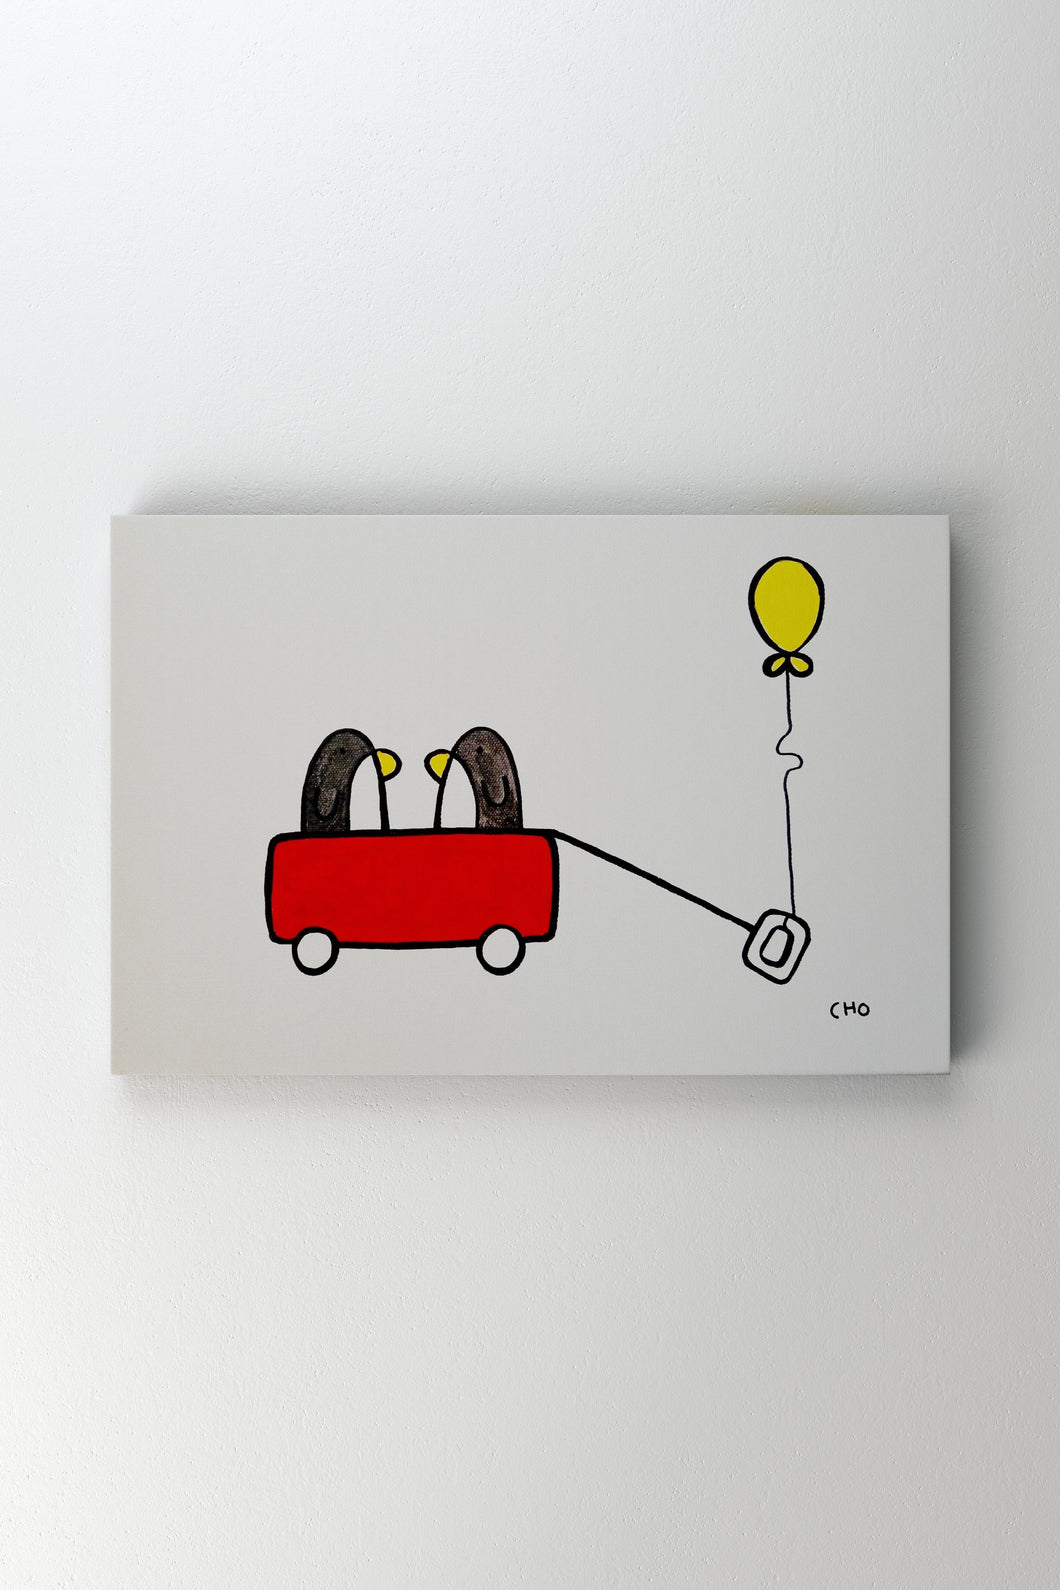 onceuponadesign.ca Best Friends | Bff Penguins Red Wagon | 12X16